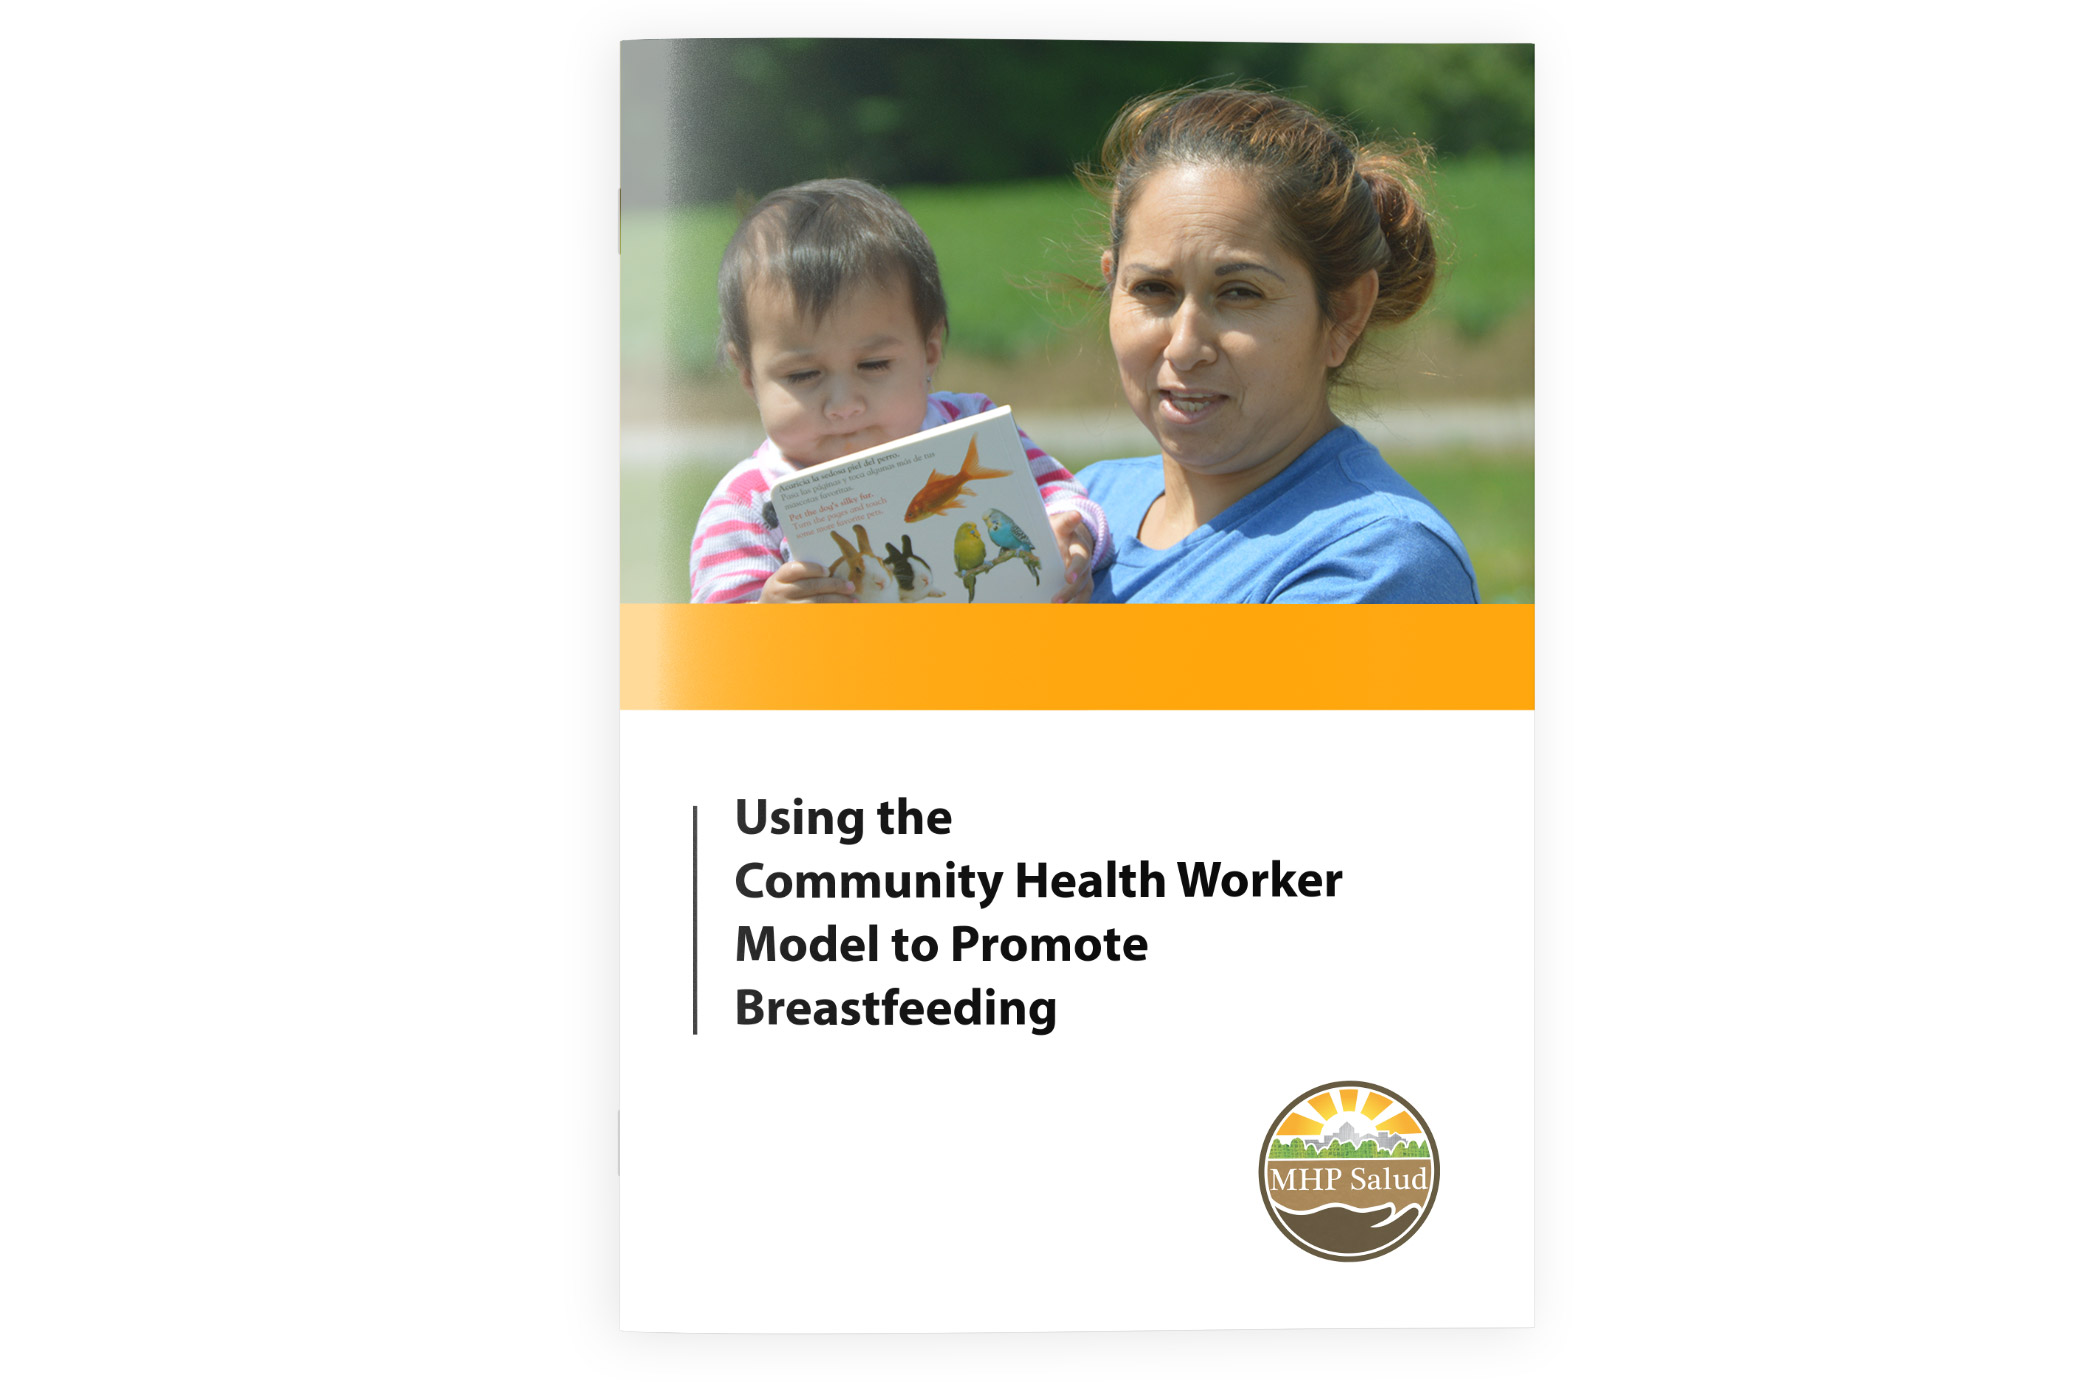 Using the Community Health Worker Model to Promote Breastfeeding